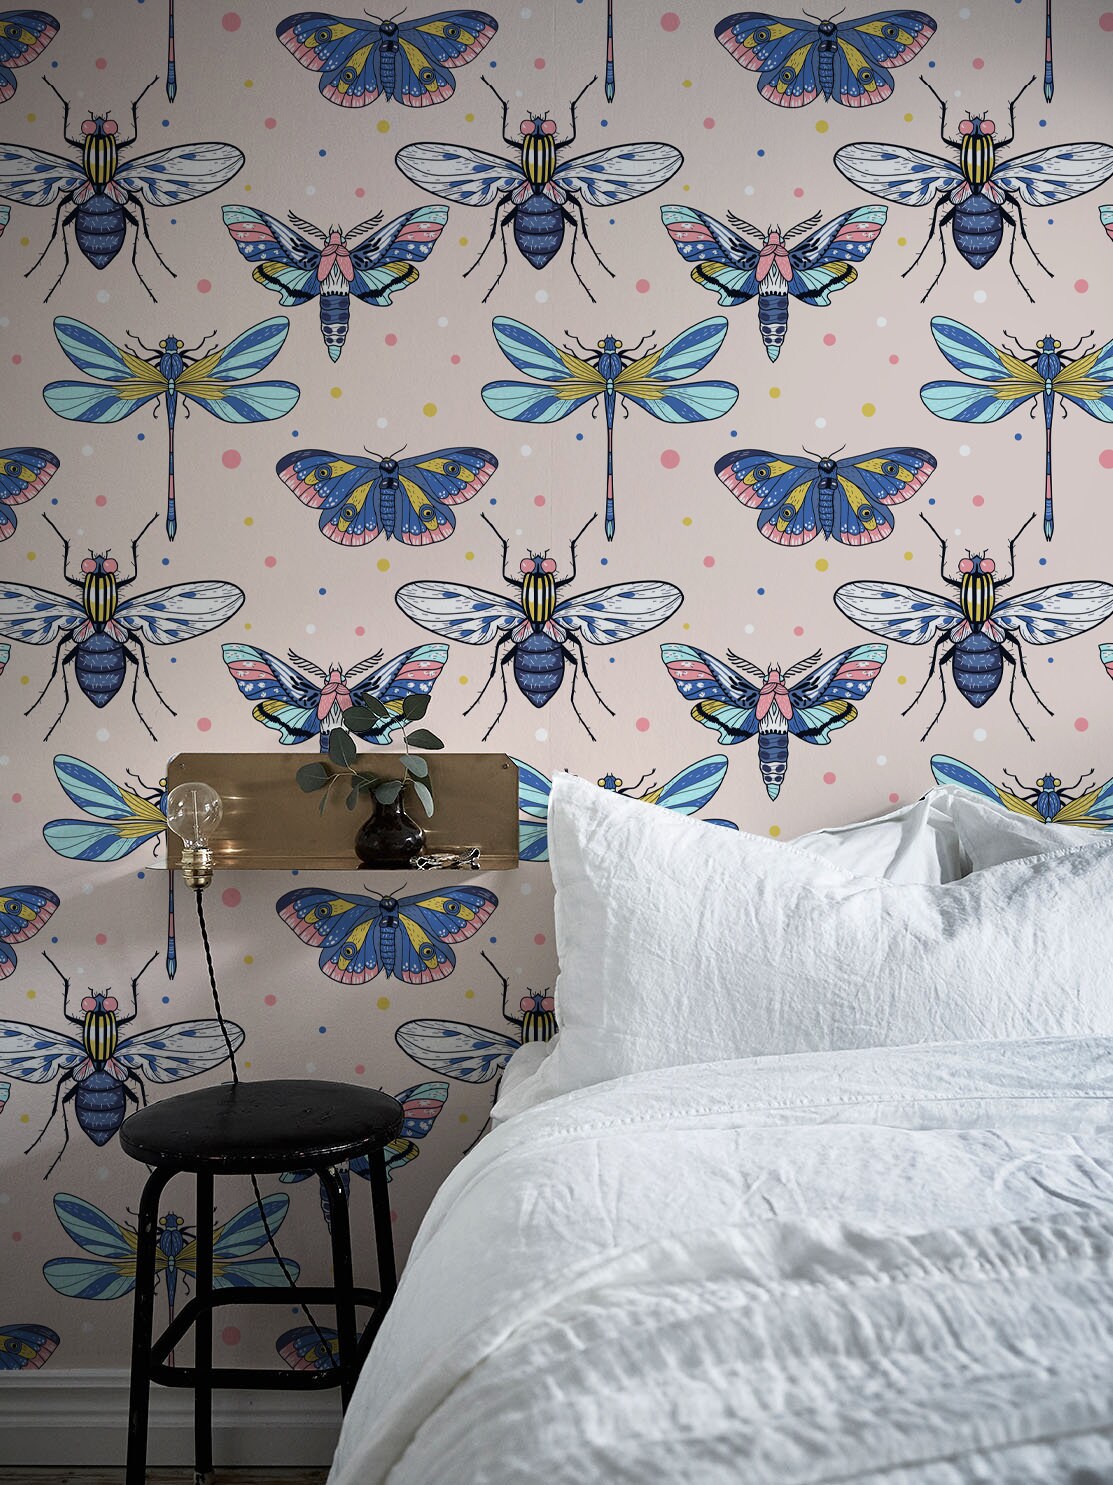 Colorful Insects Removable Wallpaper Wall Decor Home Decor Wall Art Printable Wall Art Room Decor Wall Prints Wall Hanging - B978